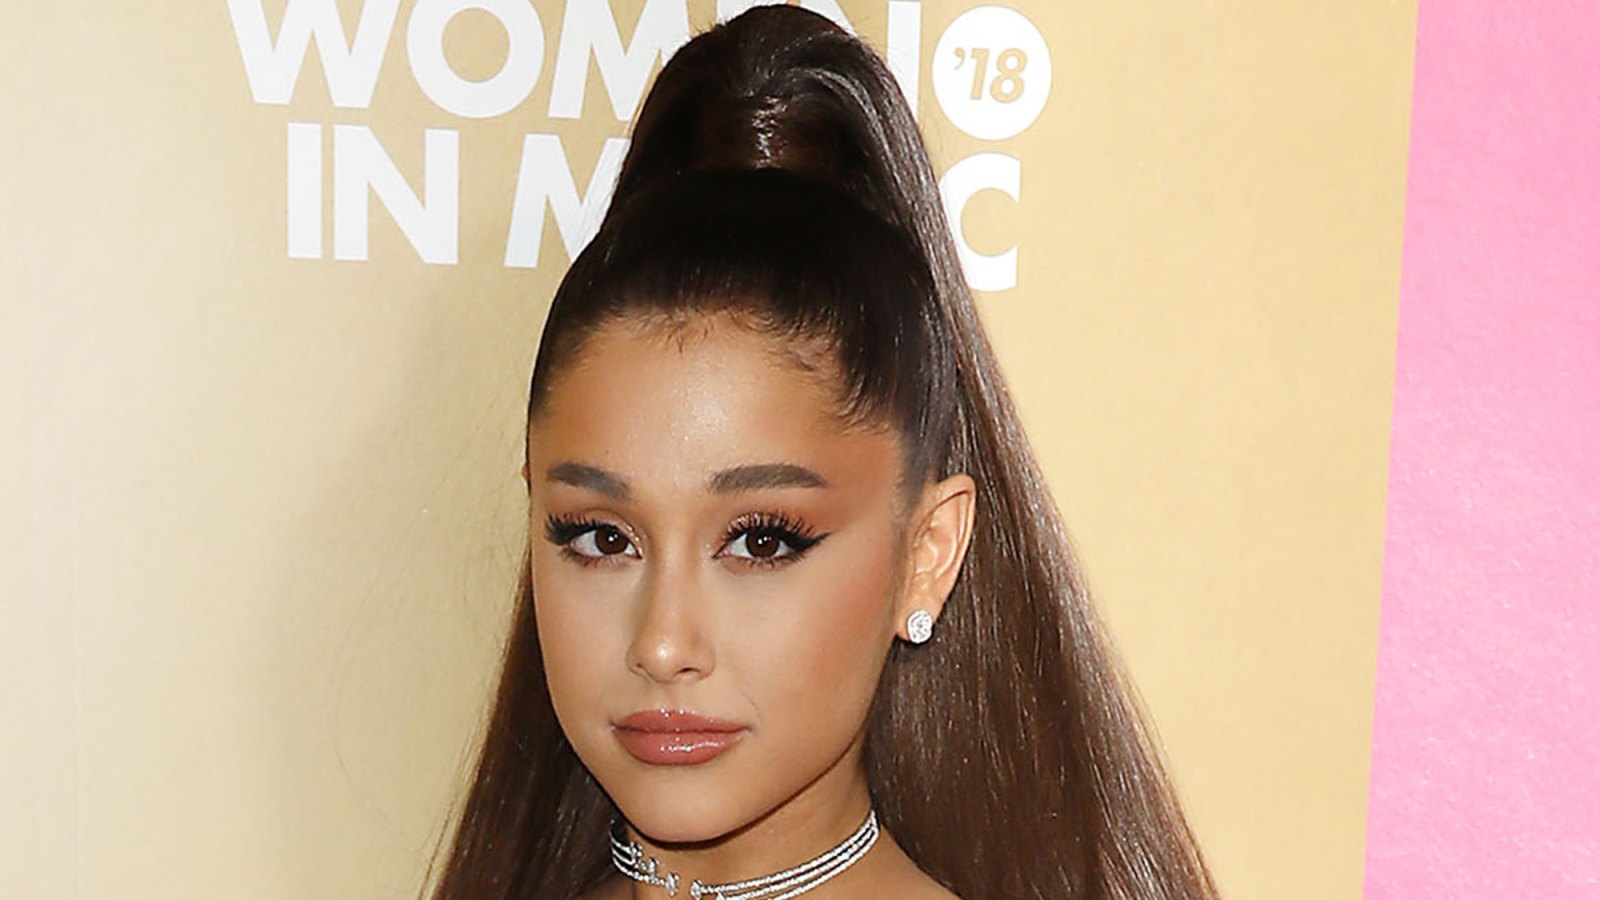 Ariana Grande Says She Is ‘Very Sick’ and in ‘So Much Pain’